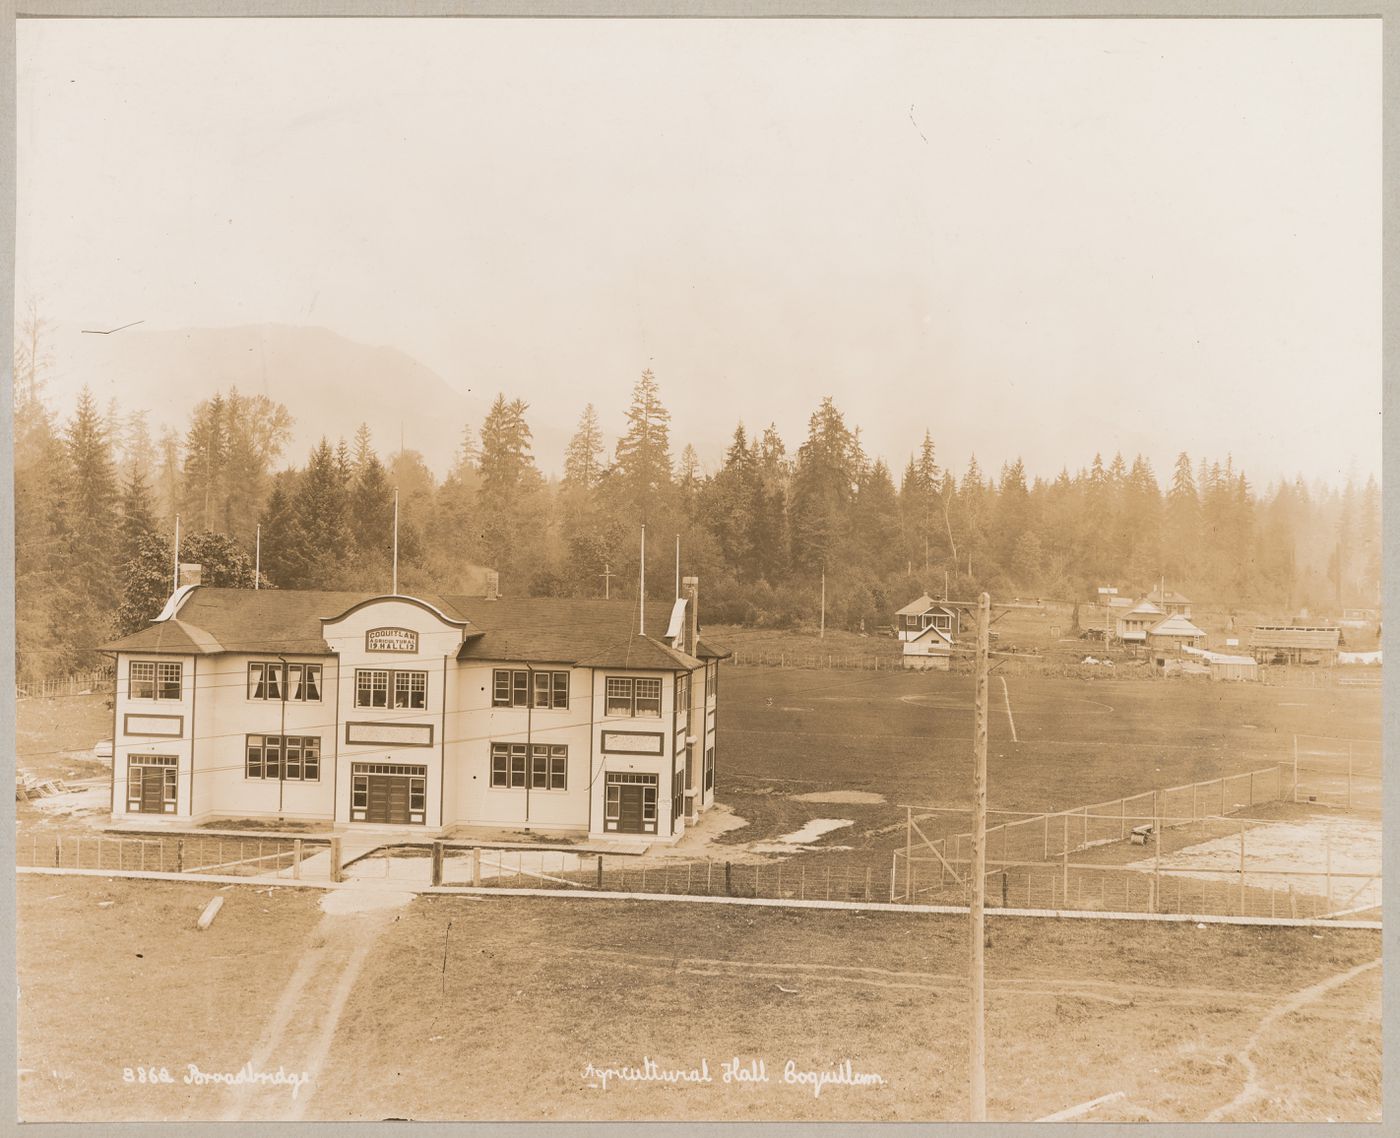 View of the principal façade of the Agricultural Hall with Greenwood housing development under construction in the background, Coquitlam (now Port Coquitlam), British Columbia